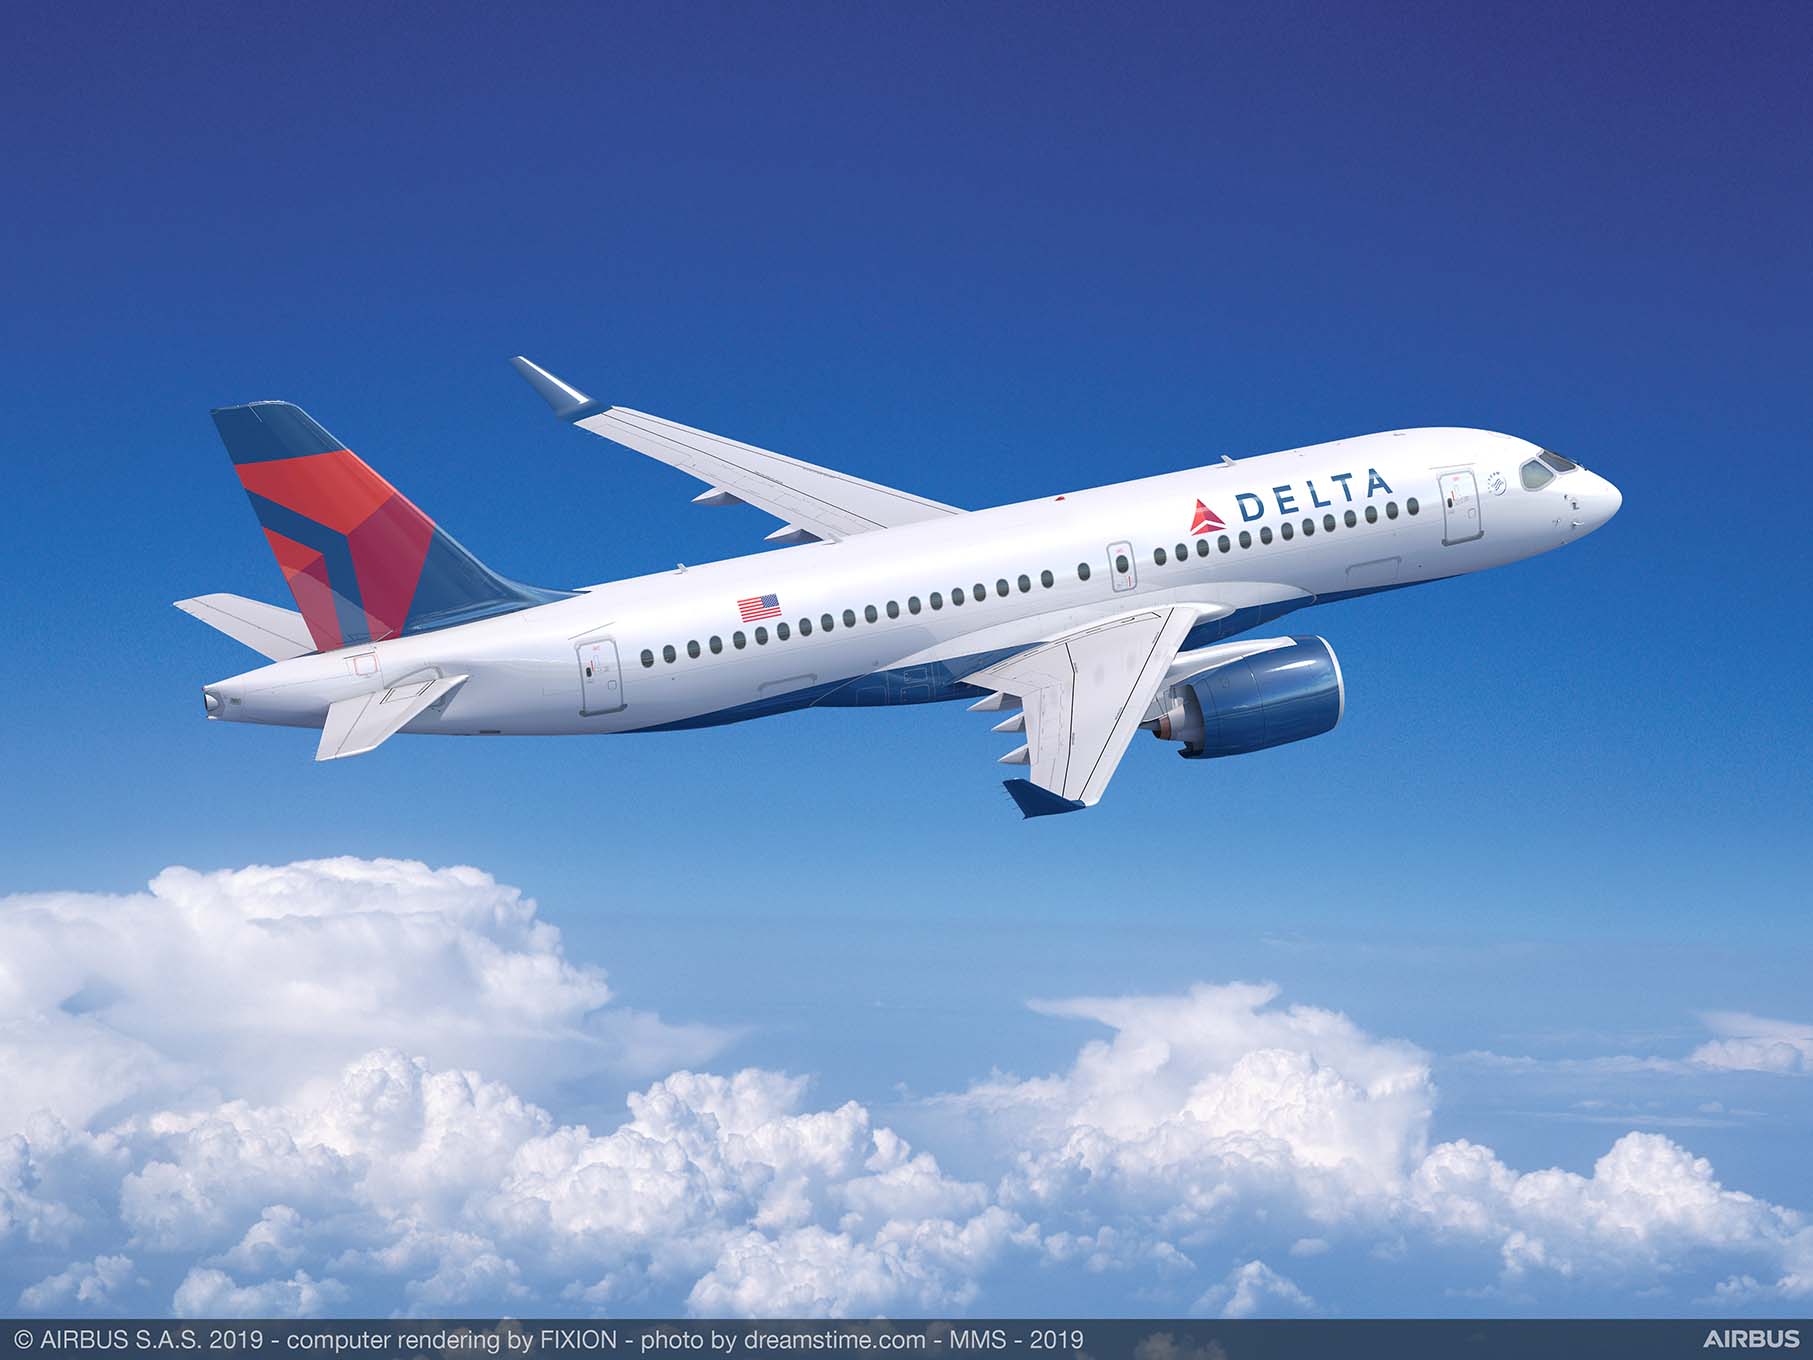 Delta Air Lines to add two new routes from Austin and Las Vegas, starting October